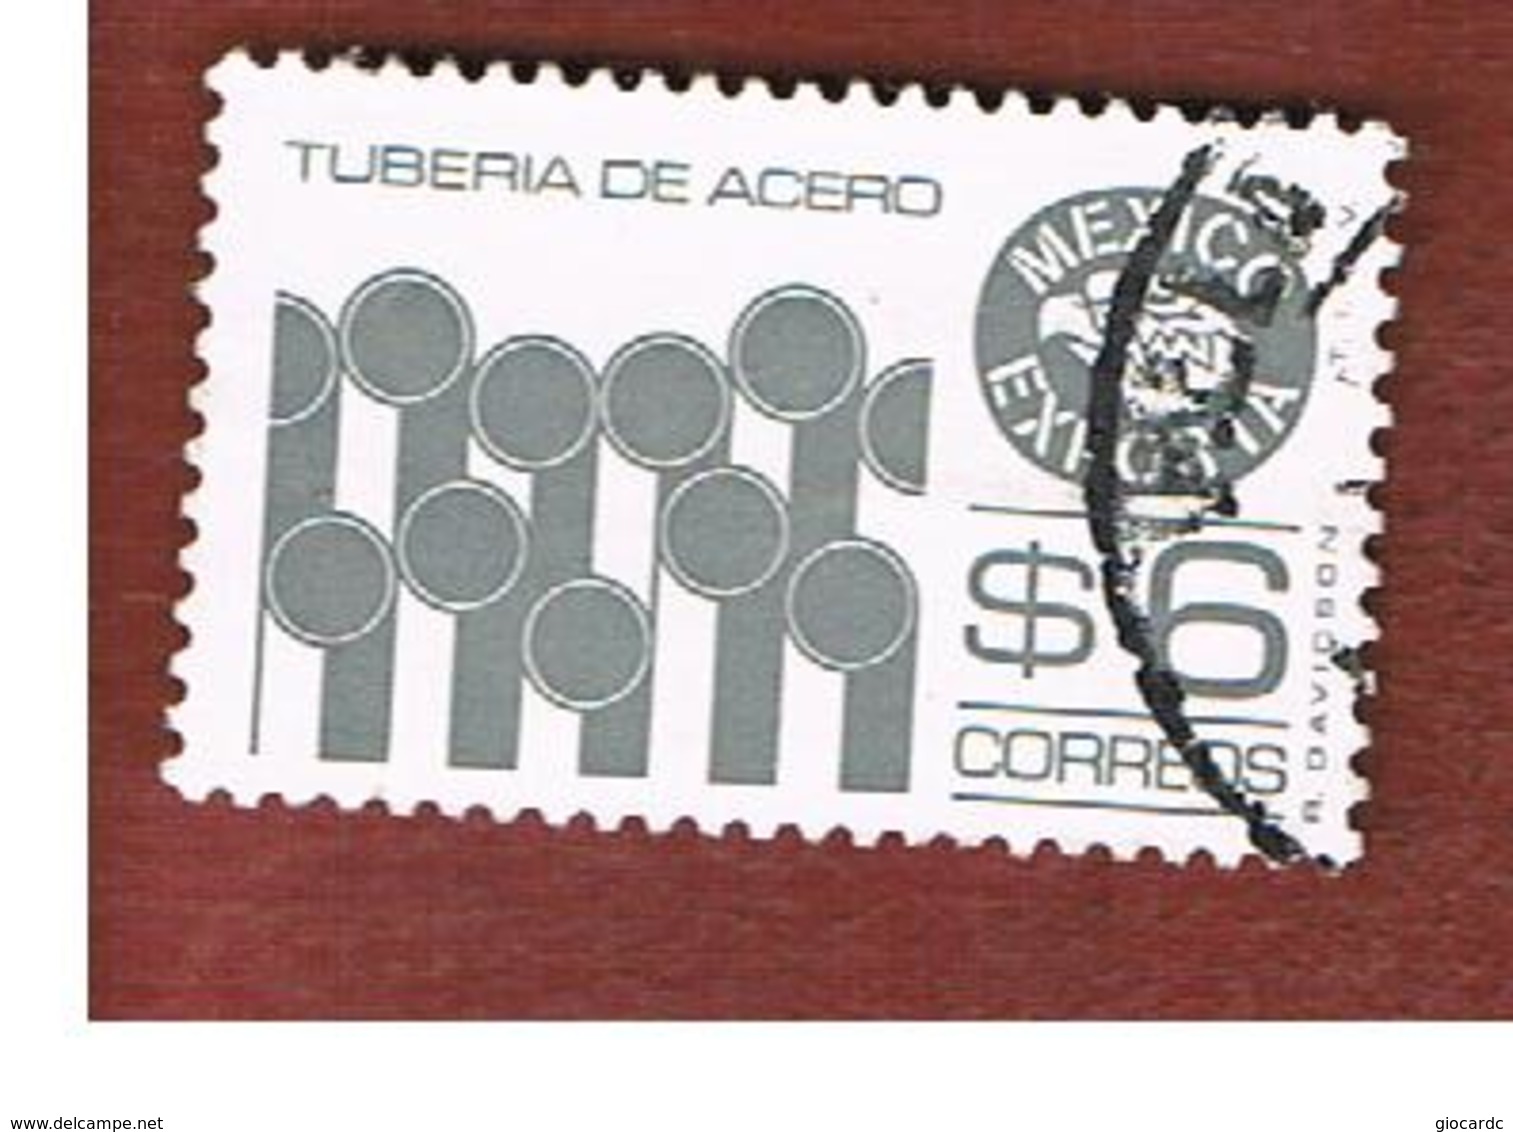 MESSICO (MEXICO) -  SG 1359ee   - 1985  MEXICAN EXPORTS: STEEL PIPES             -  USED° - Messico